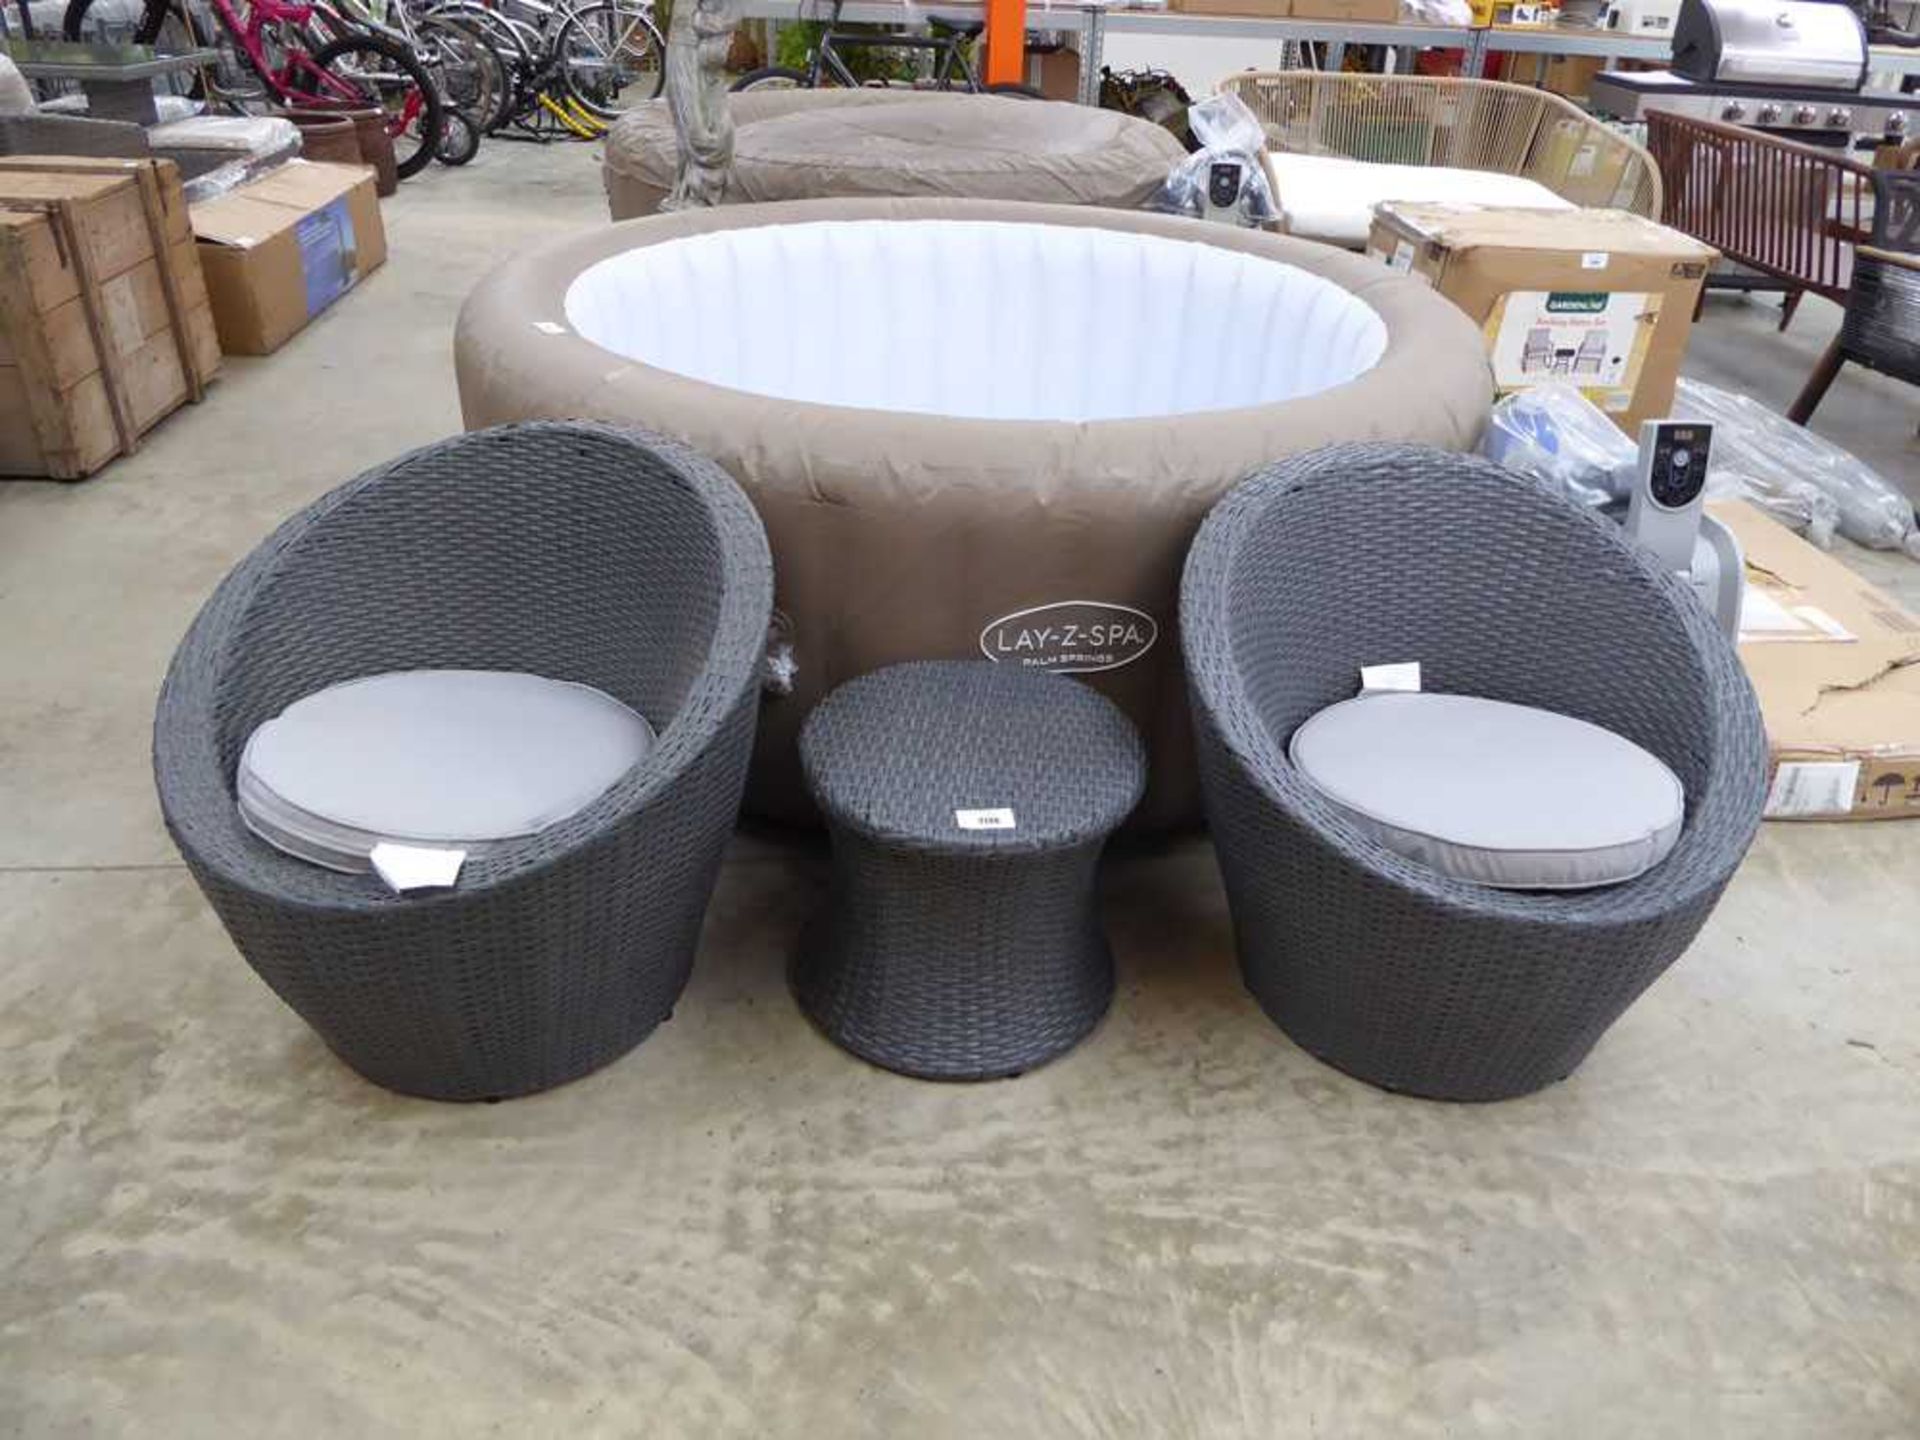 +VAT Charcoal grey rattan 3 piece patio lounge set comprising 2 armchairs and coffee table